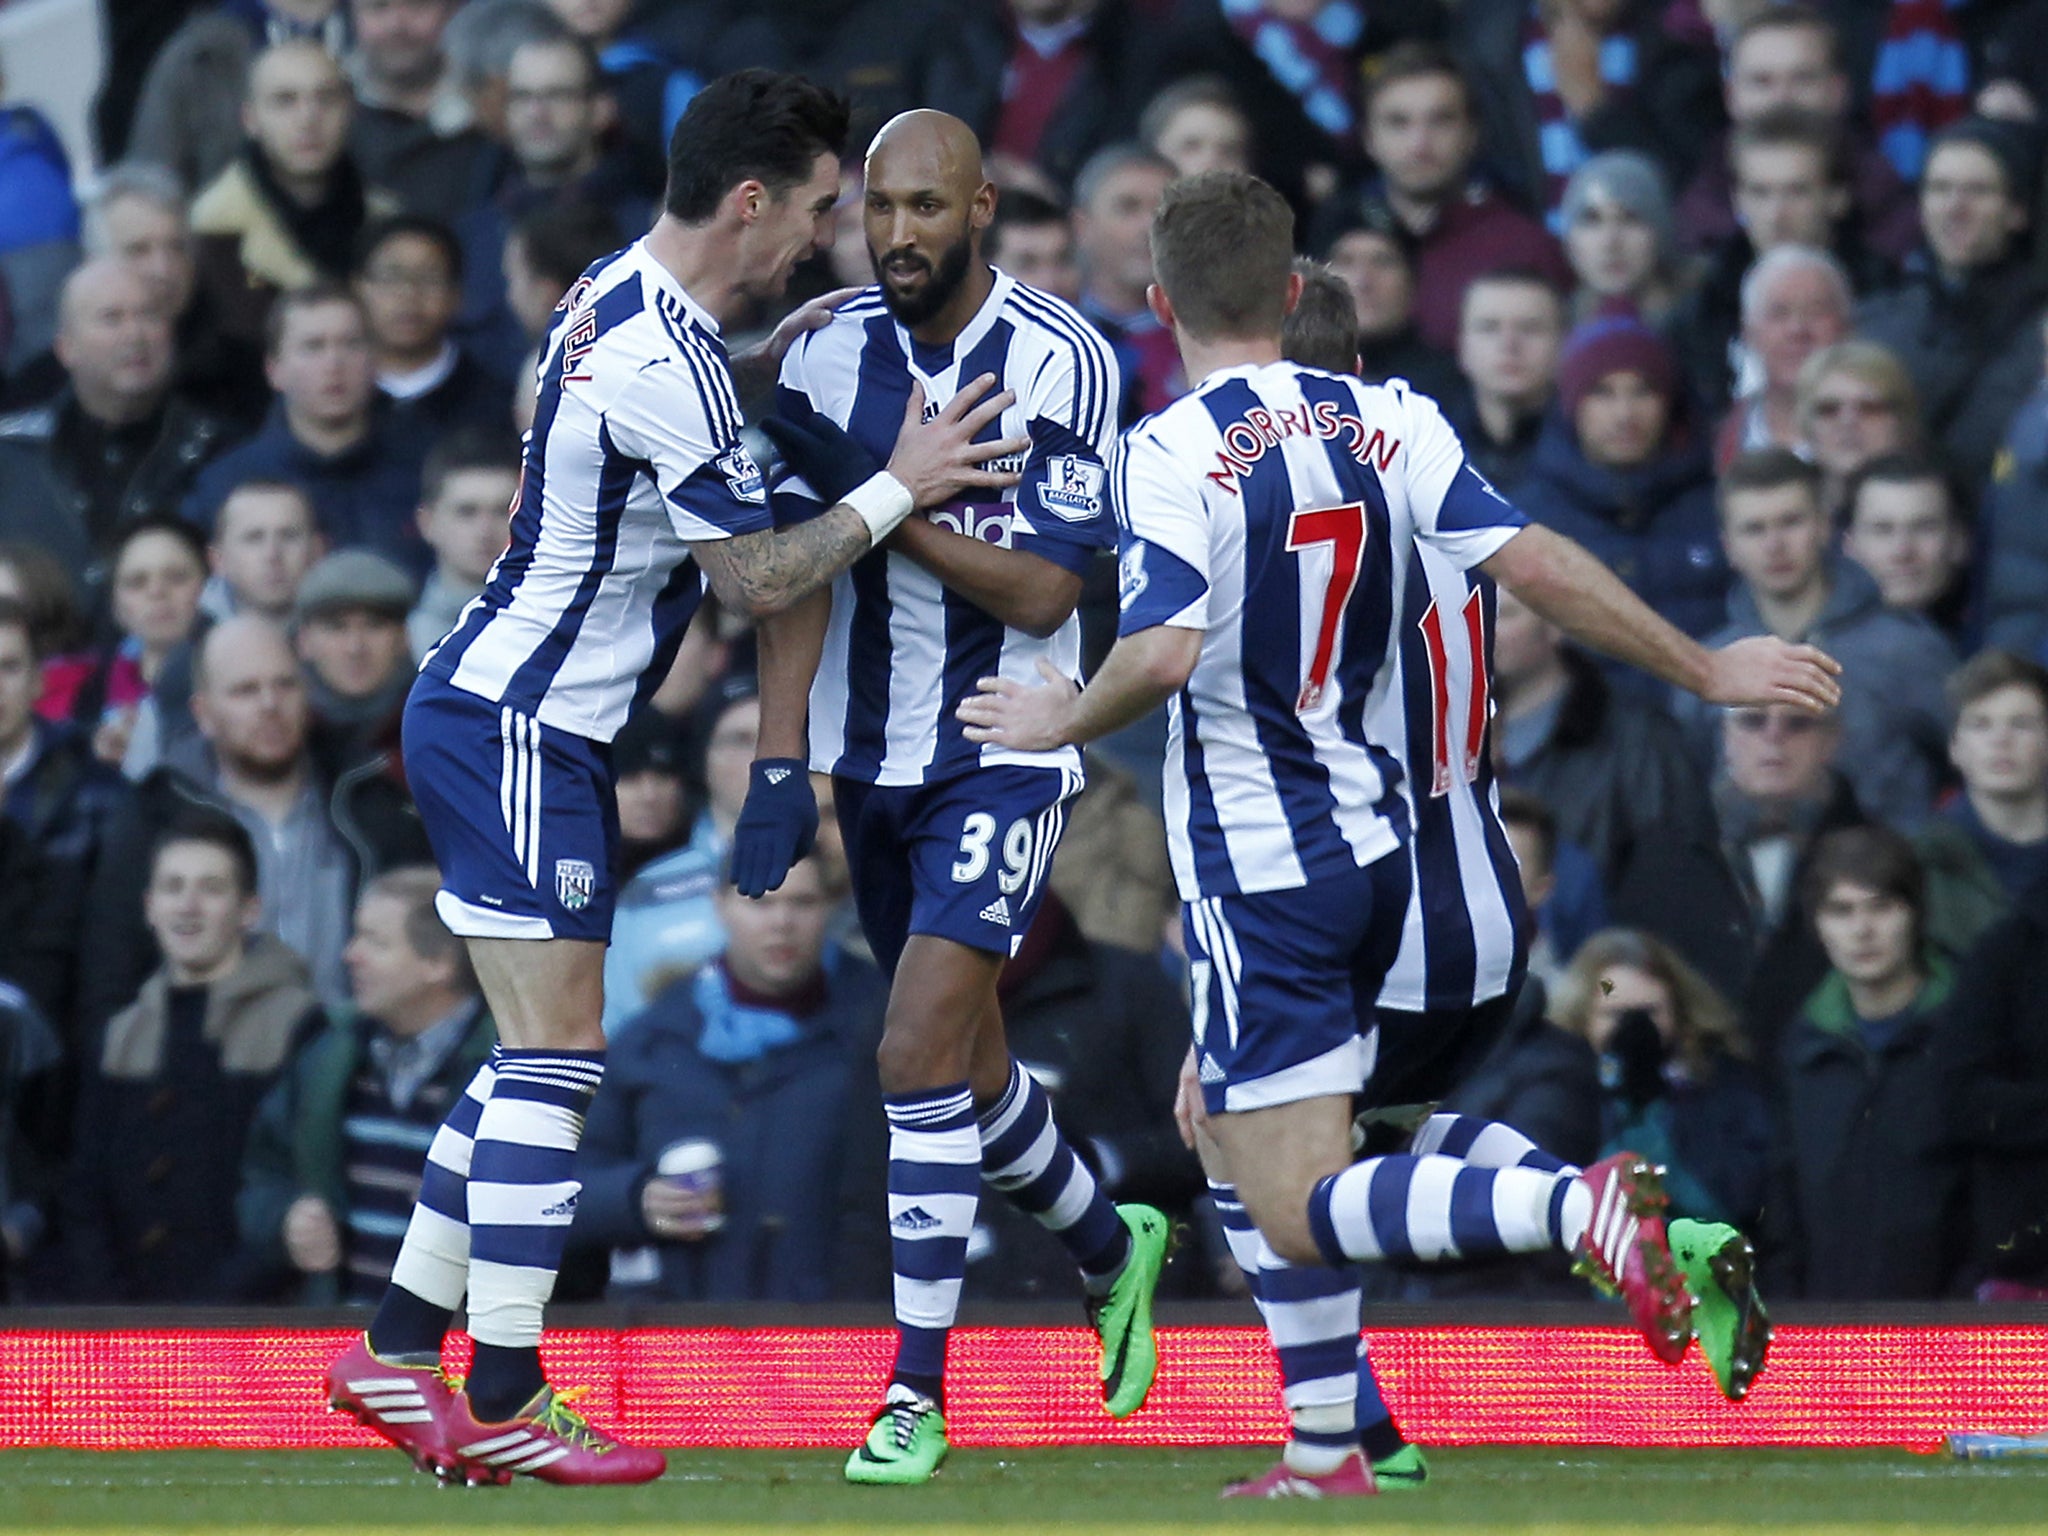 West Brom striker Nicolas Anelka makes an alleged anti-Semitic gesture when celebrating his first goal against West Ham